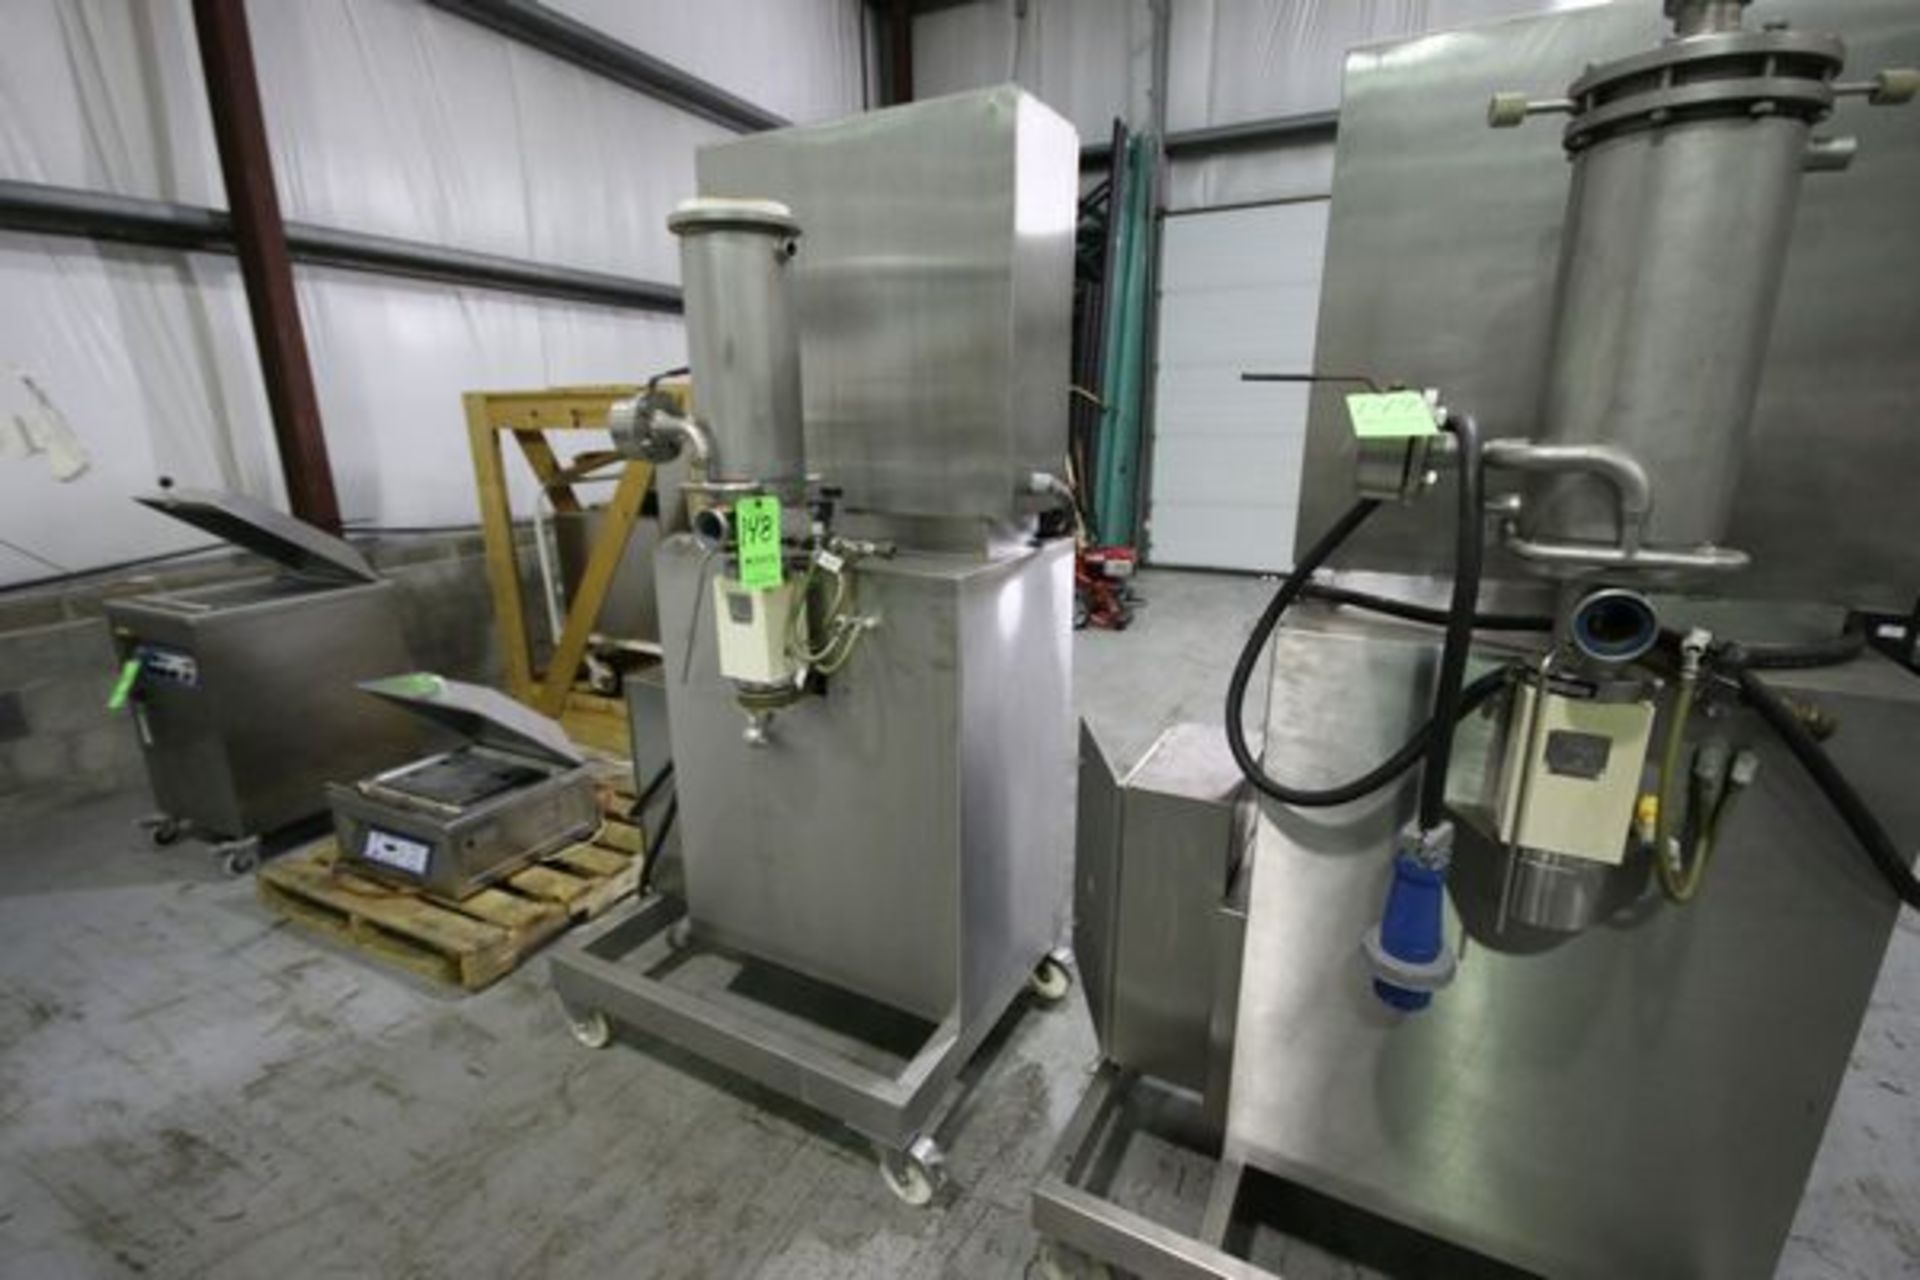 Burdosa Emulsfier Mixer, Model MISCHER GR80, S/N 2408018590 with Jacketed Mixing Chamber and Control